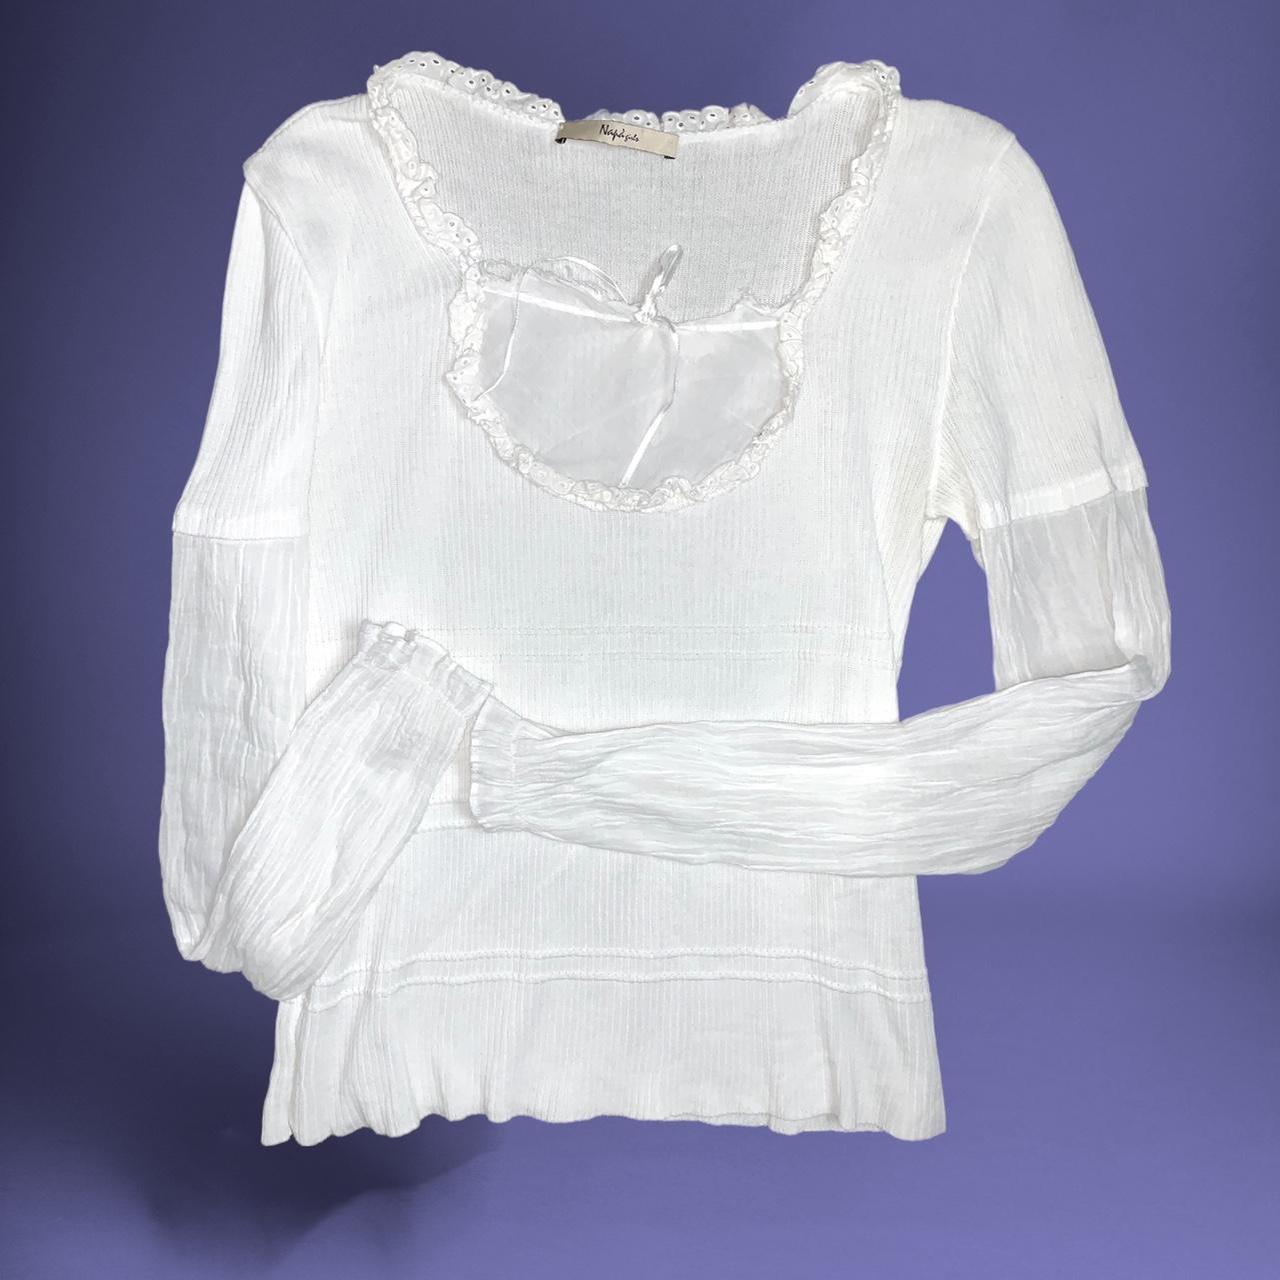 Vintage 90s white fairycore frilly layered long-sleeved milkmaid style top